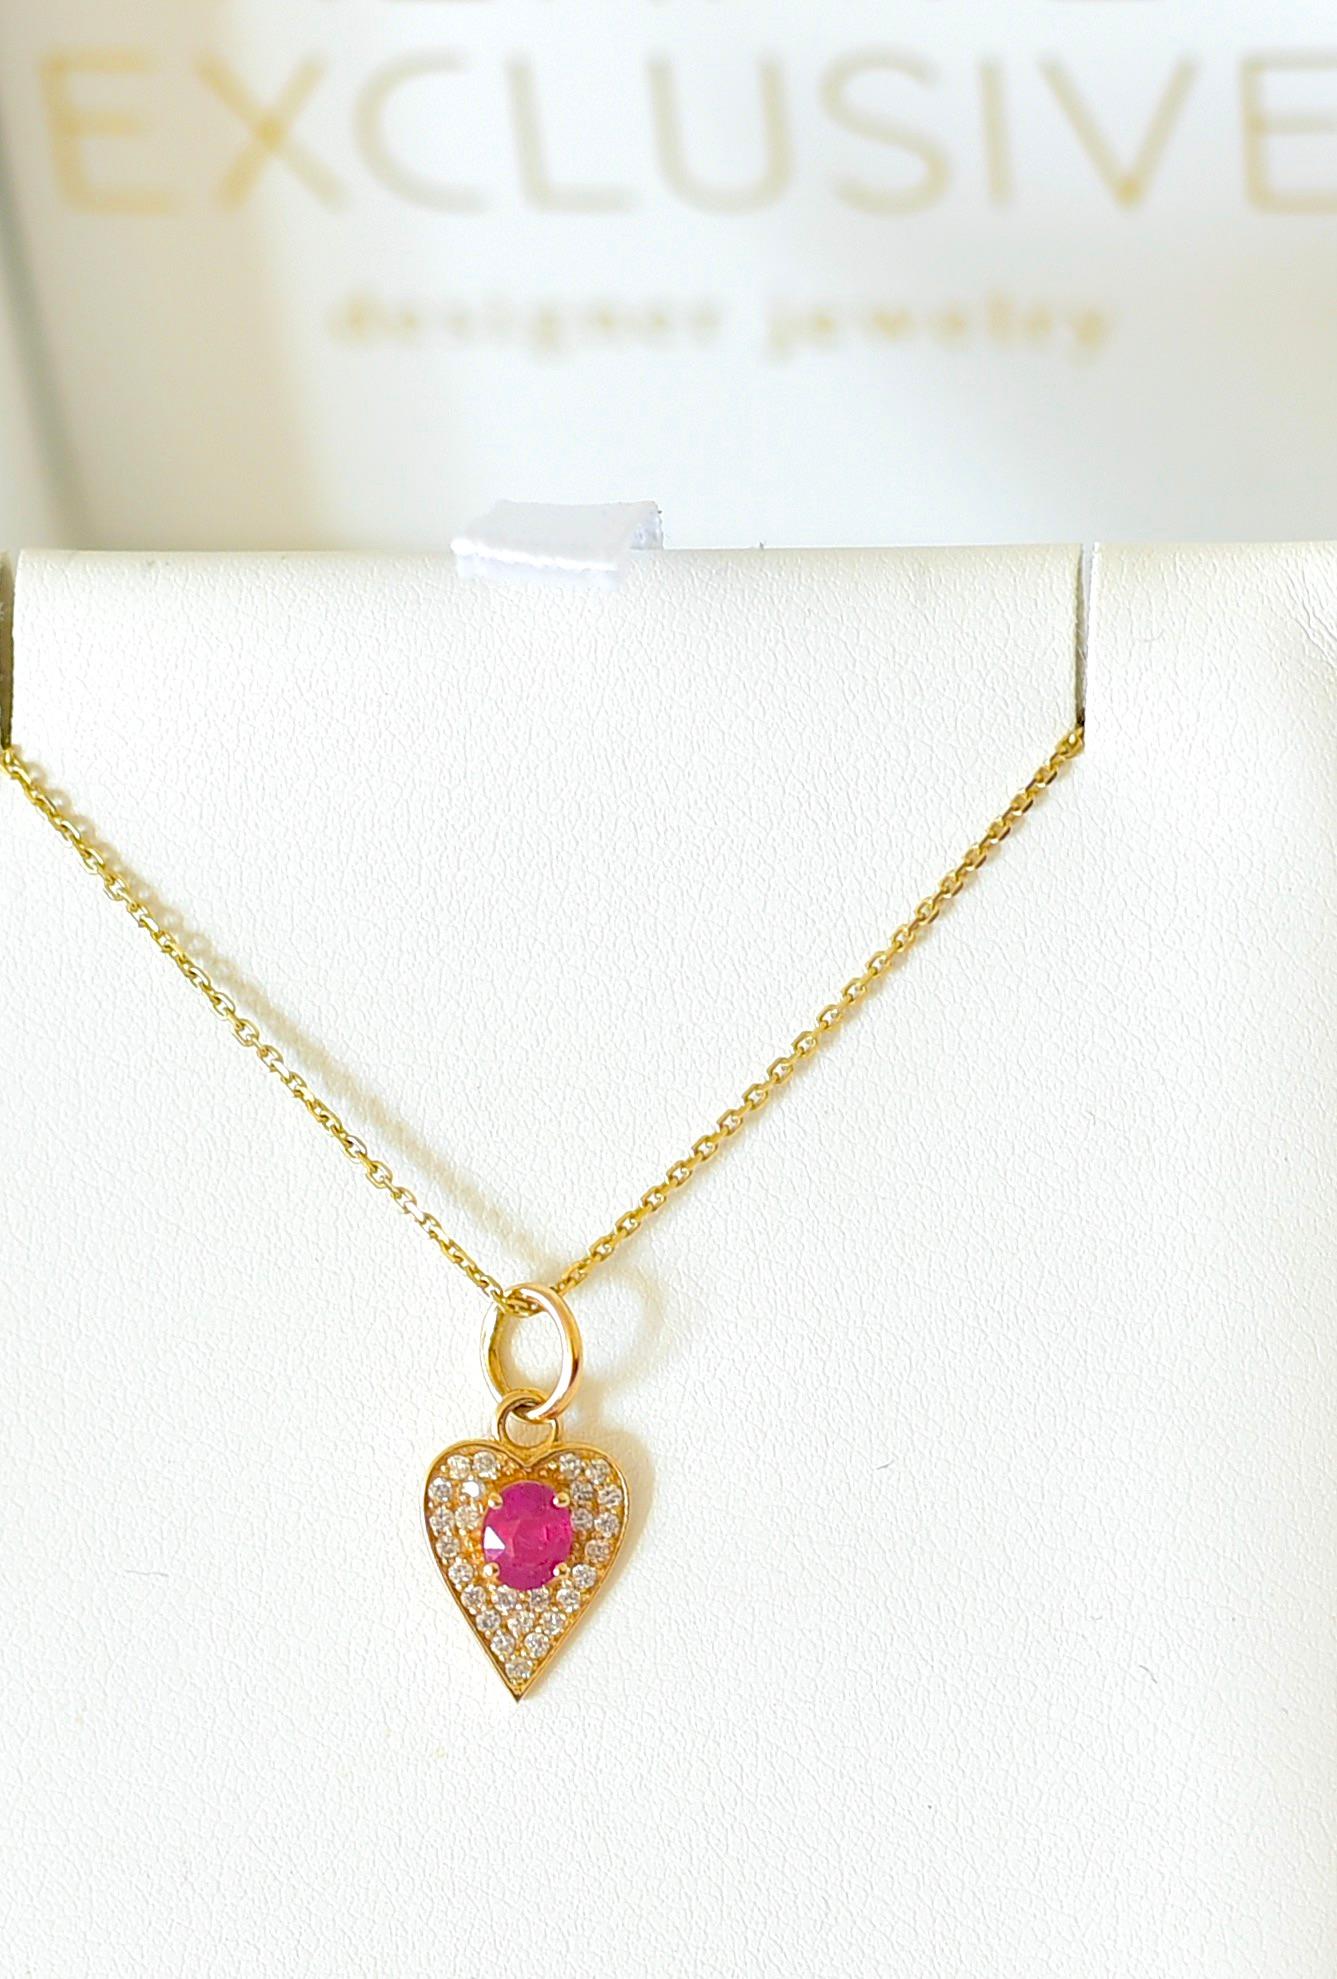 Women's 14K Solid Yellow Gold, Ruby and Diamond Accents Necklace.